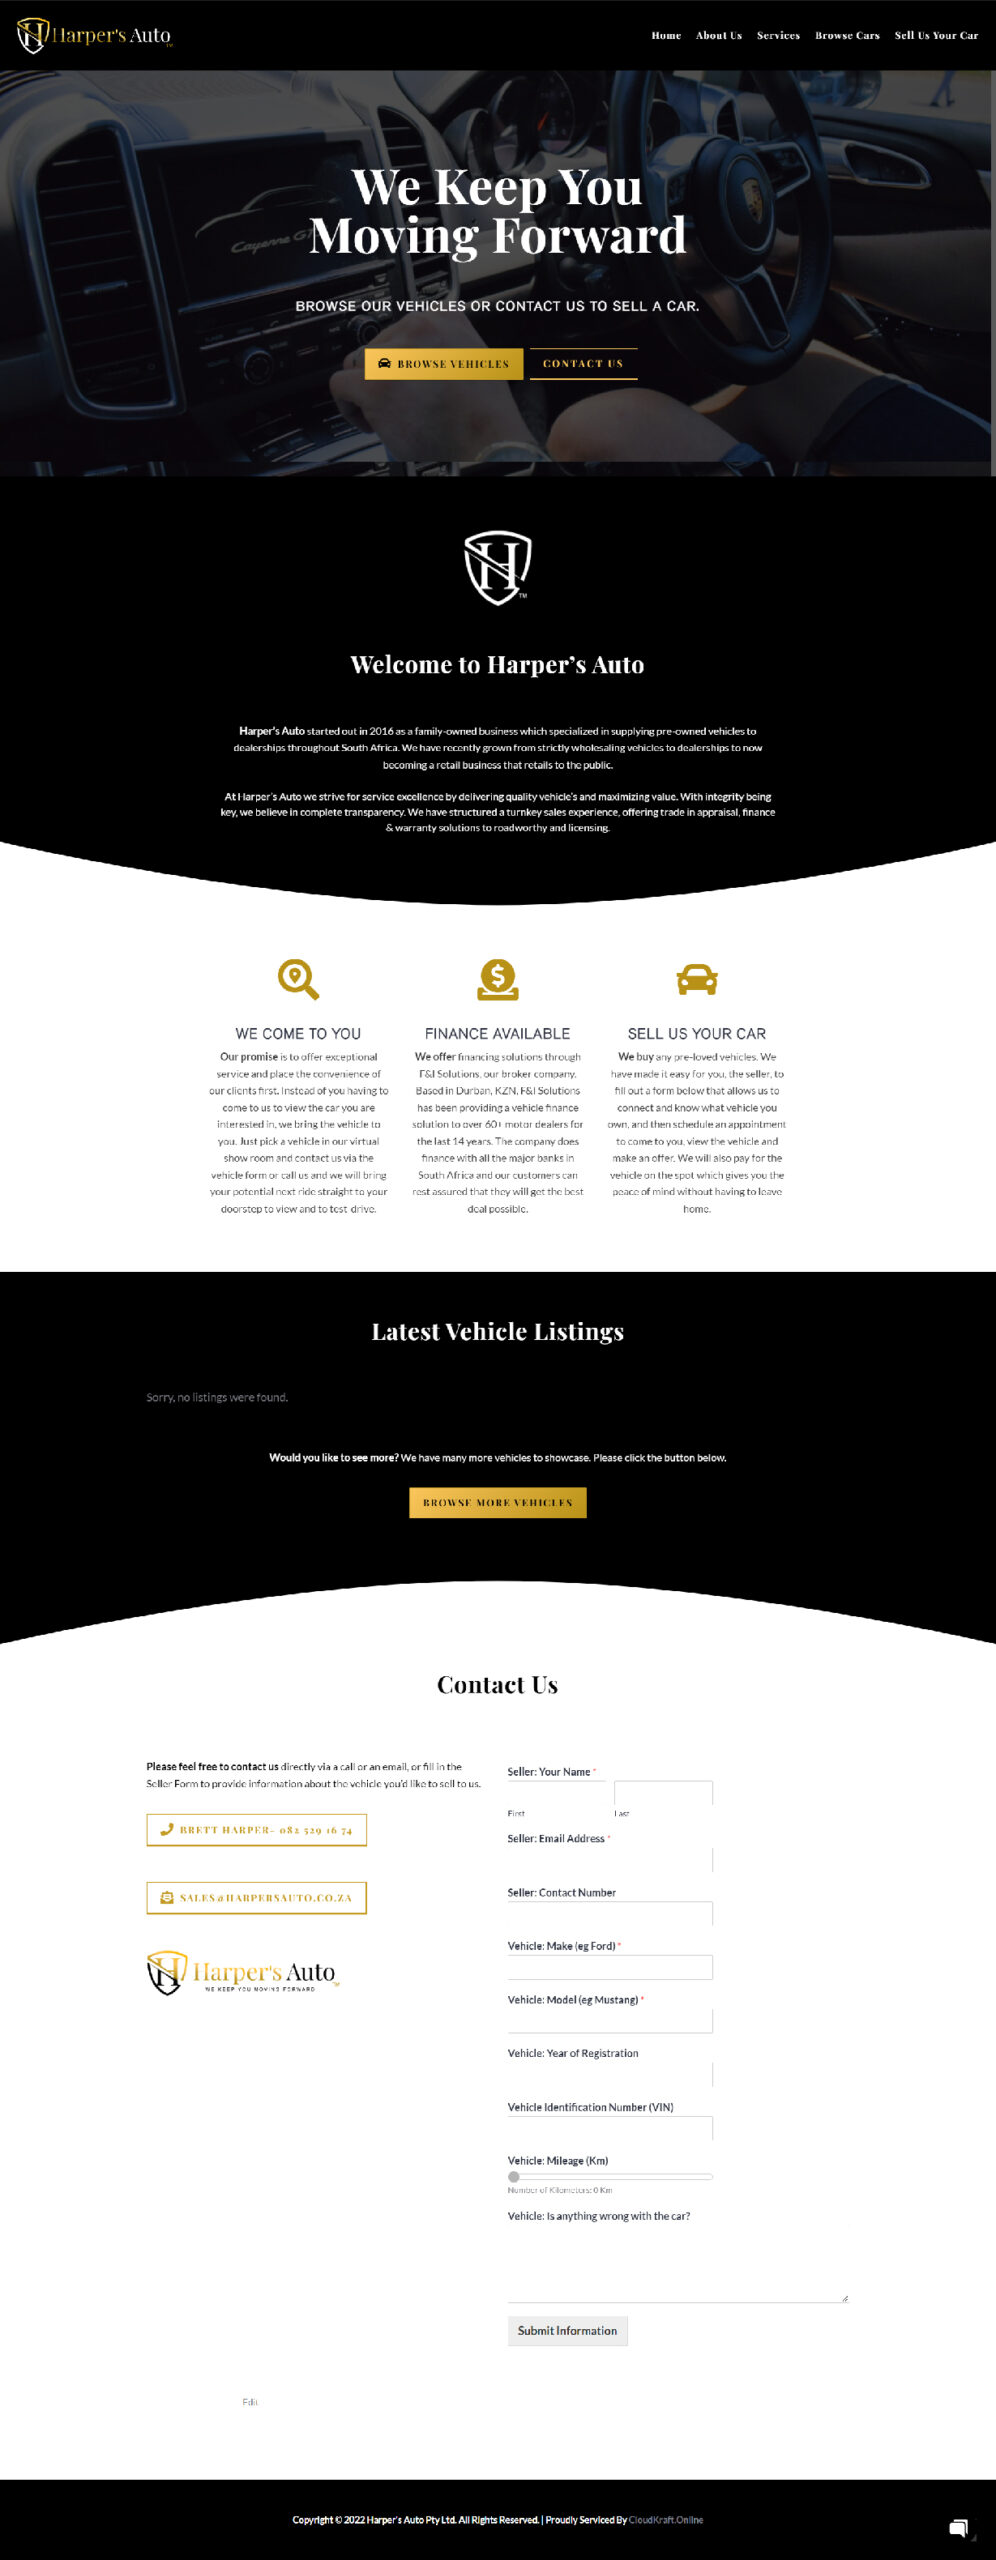 The final Harper's Auto website layout showcasing its sections